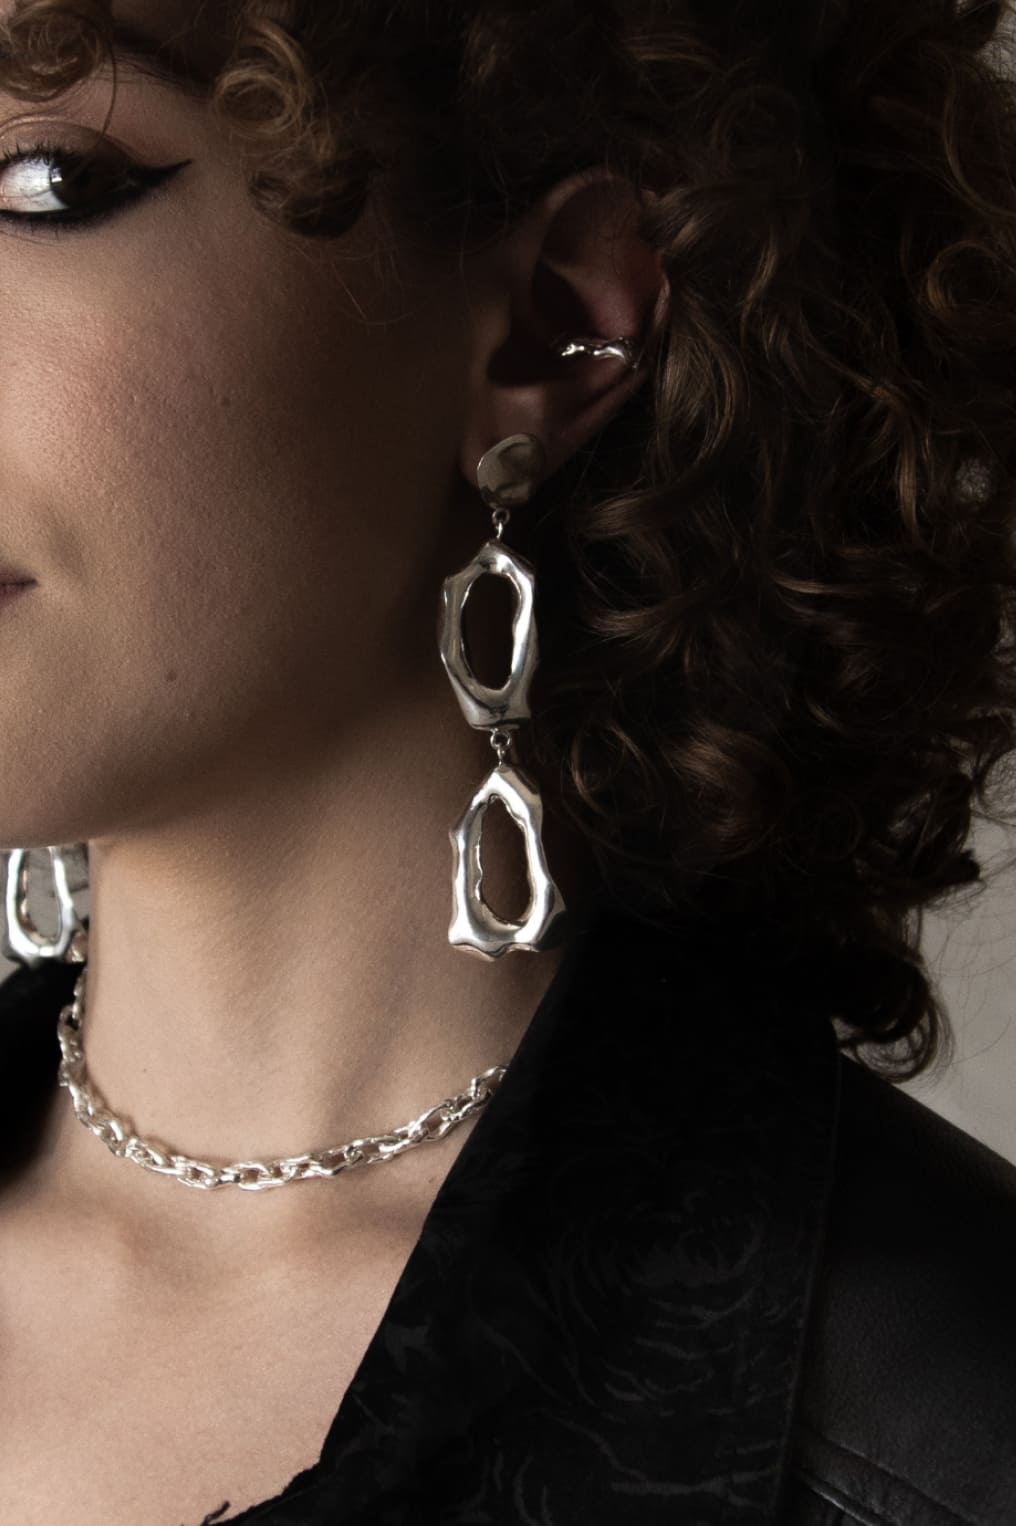 Speculo Silver Earrings